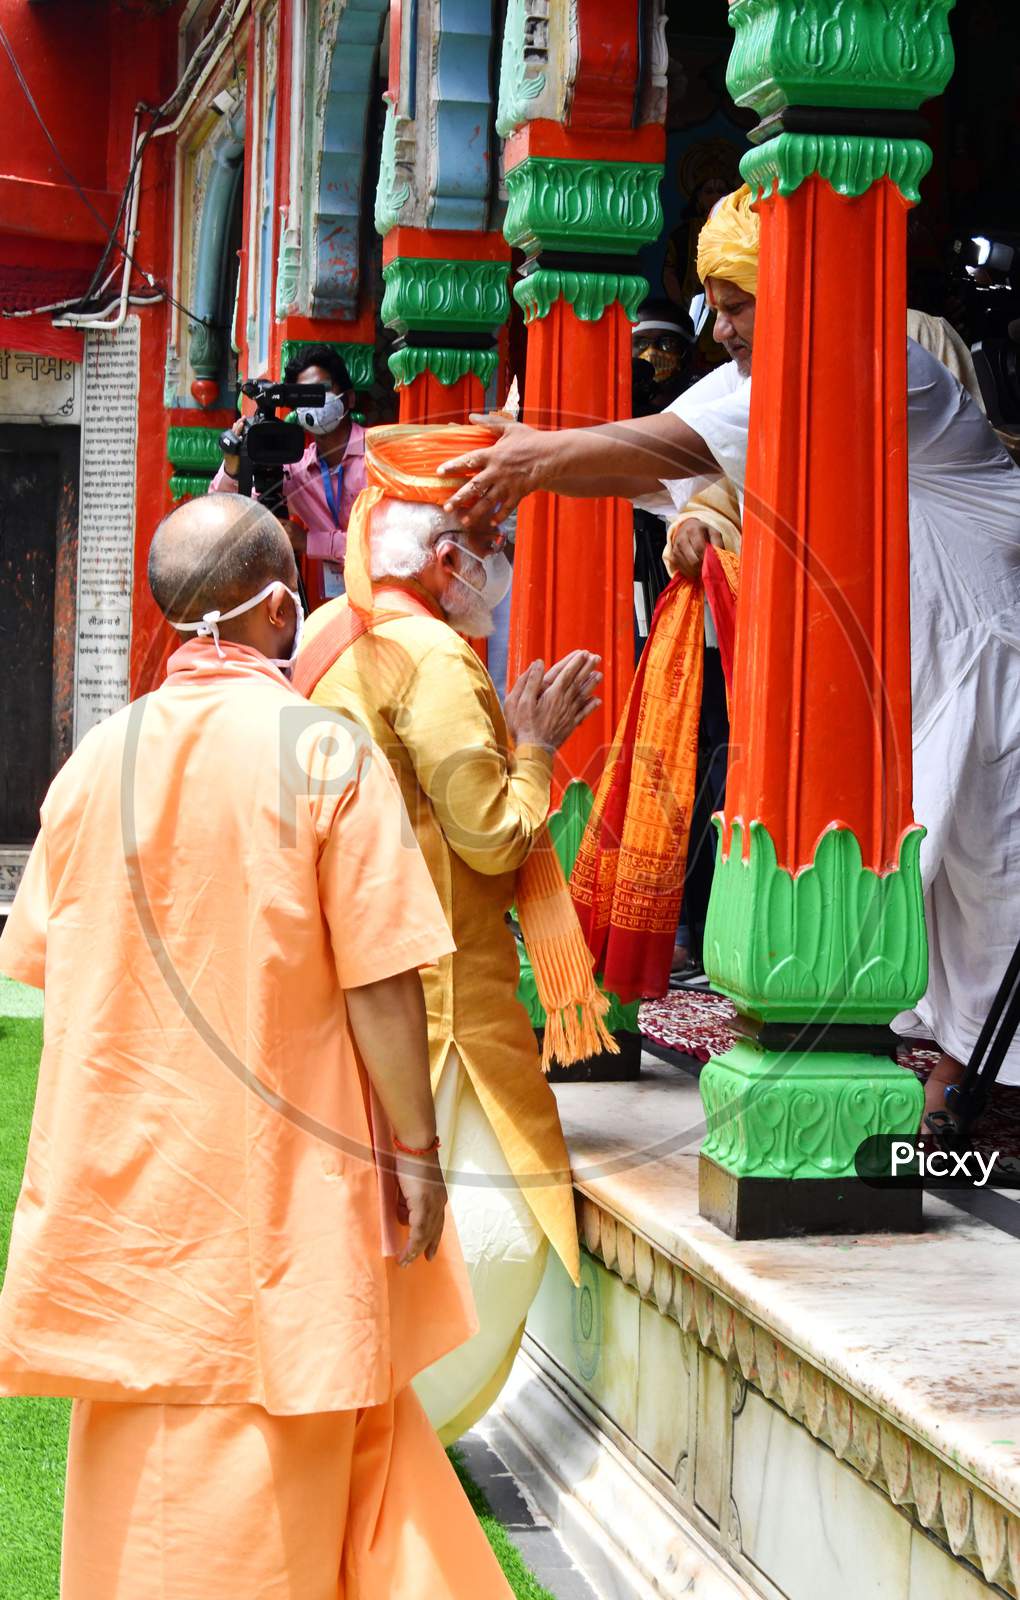 Prime Minister Narendra Modi and Uttar Pradesh Chief Minister Yogi Adityanath visit and perform religious rituals at Hanuman Garhi temple, ahead of the foundation laying ceremony for a Hindu Lord Ram's temple in Ayodhya, India, August 5, 2020.